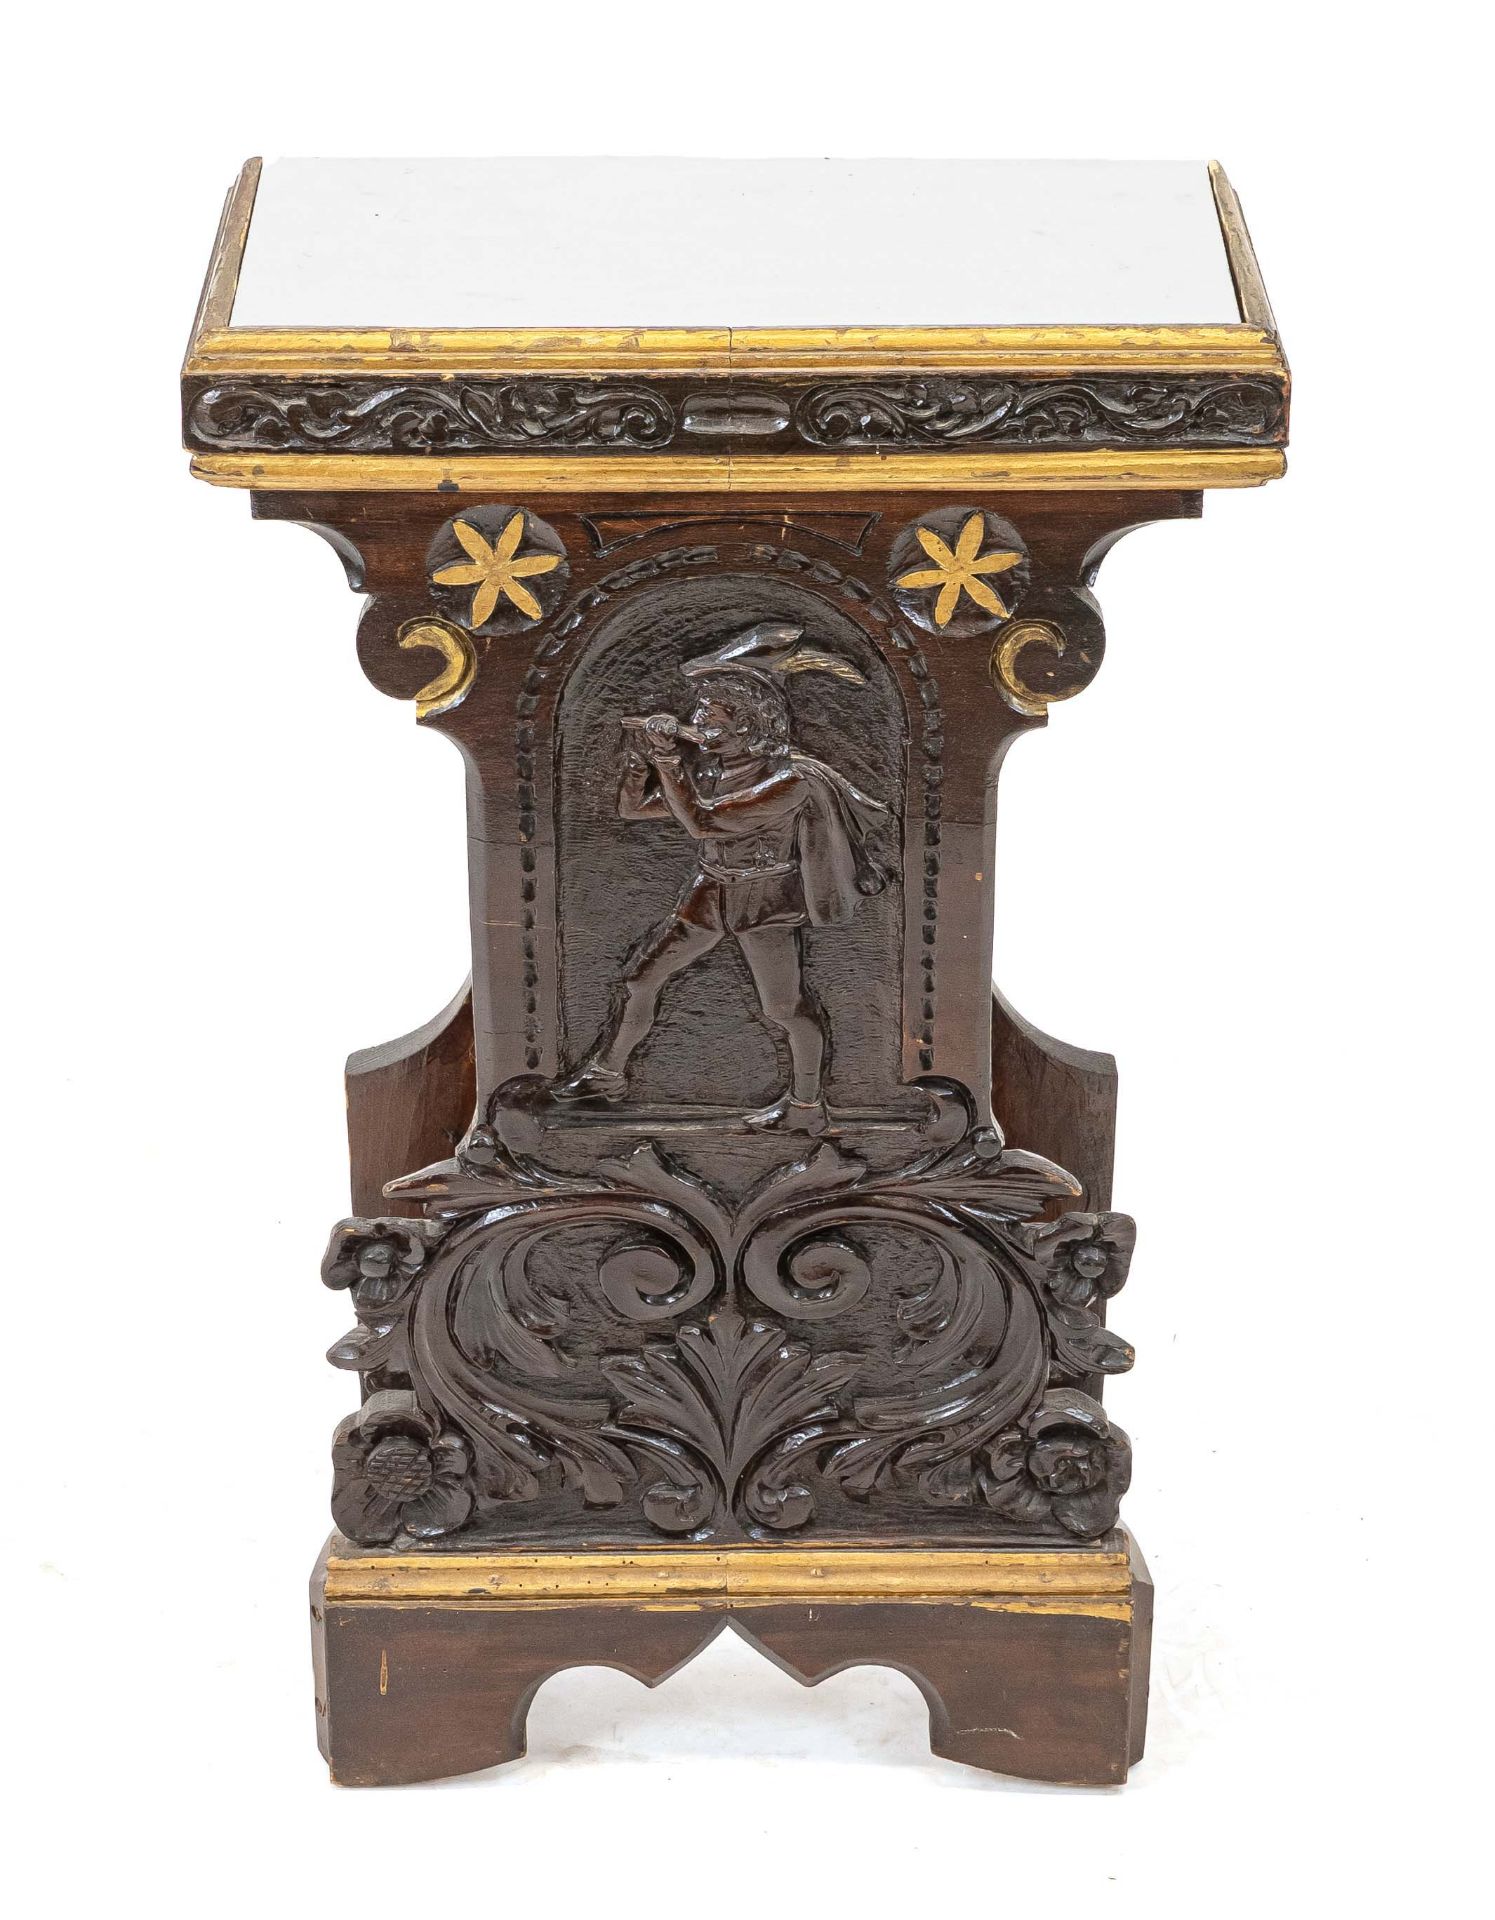 Console table, 19th c., brown wood, partly carved, depicting a flute player, 74 x 45 x 20 cm.